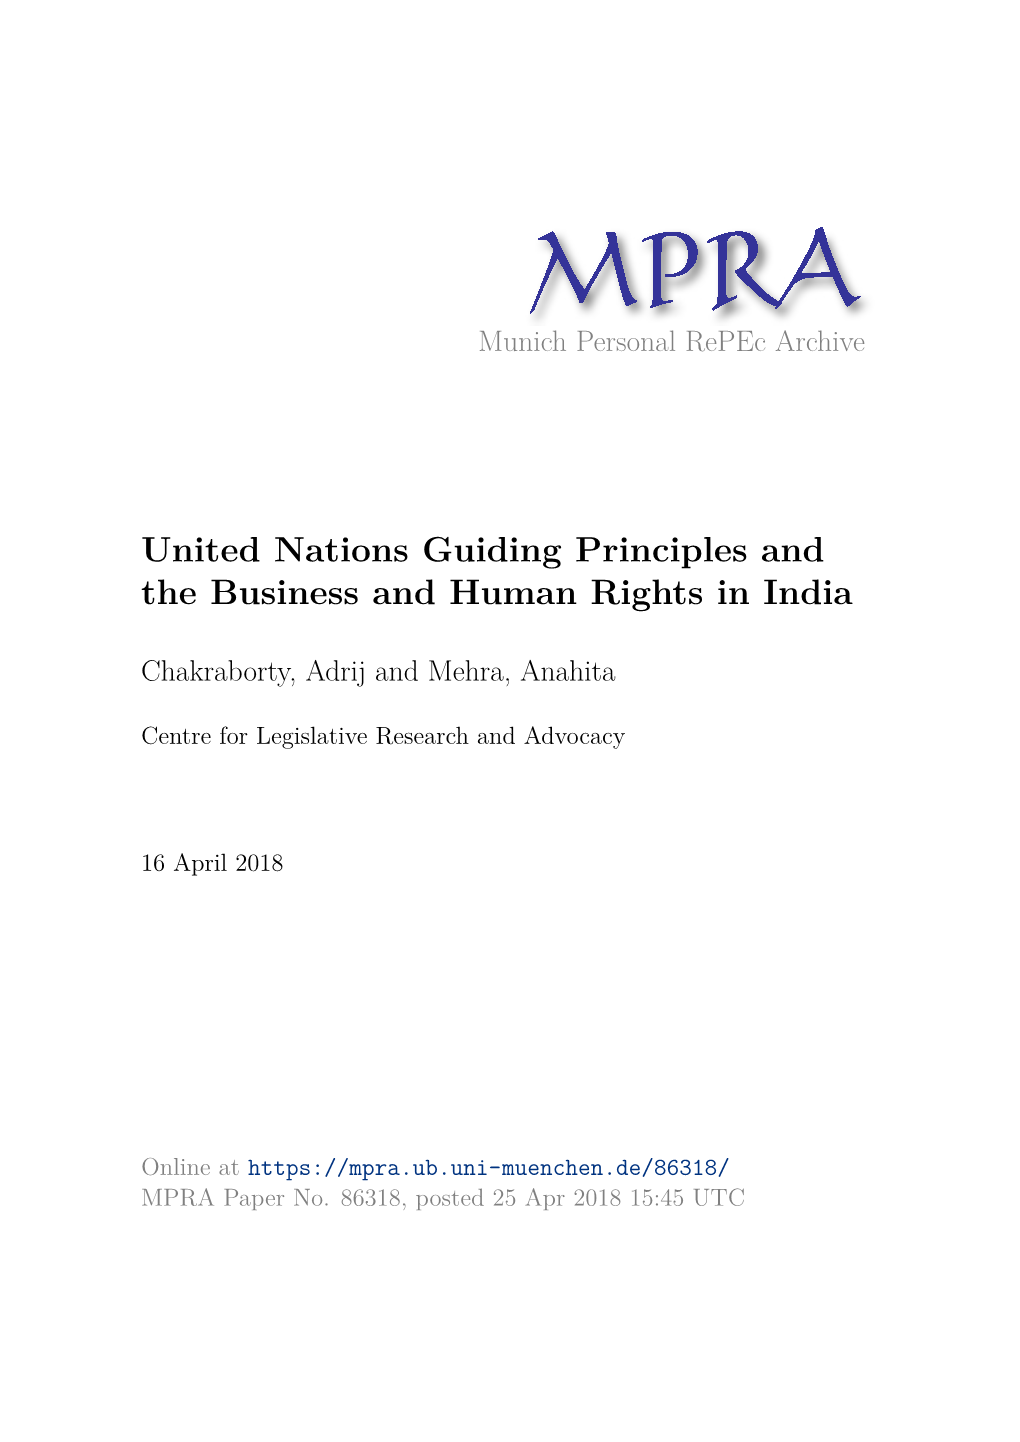 United Nations Guiding Principles and the Business and Human Rights in India